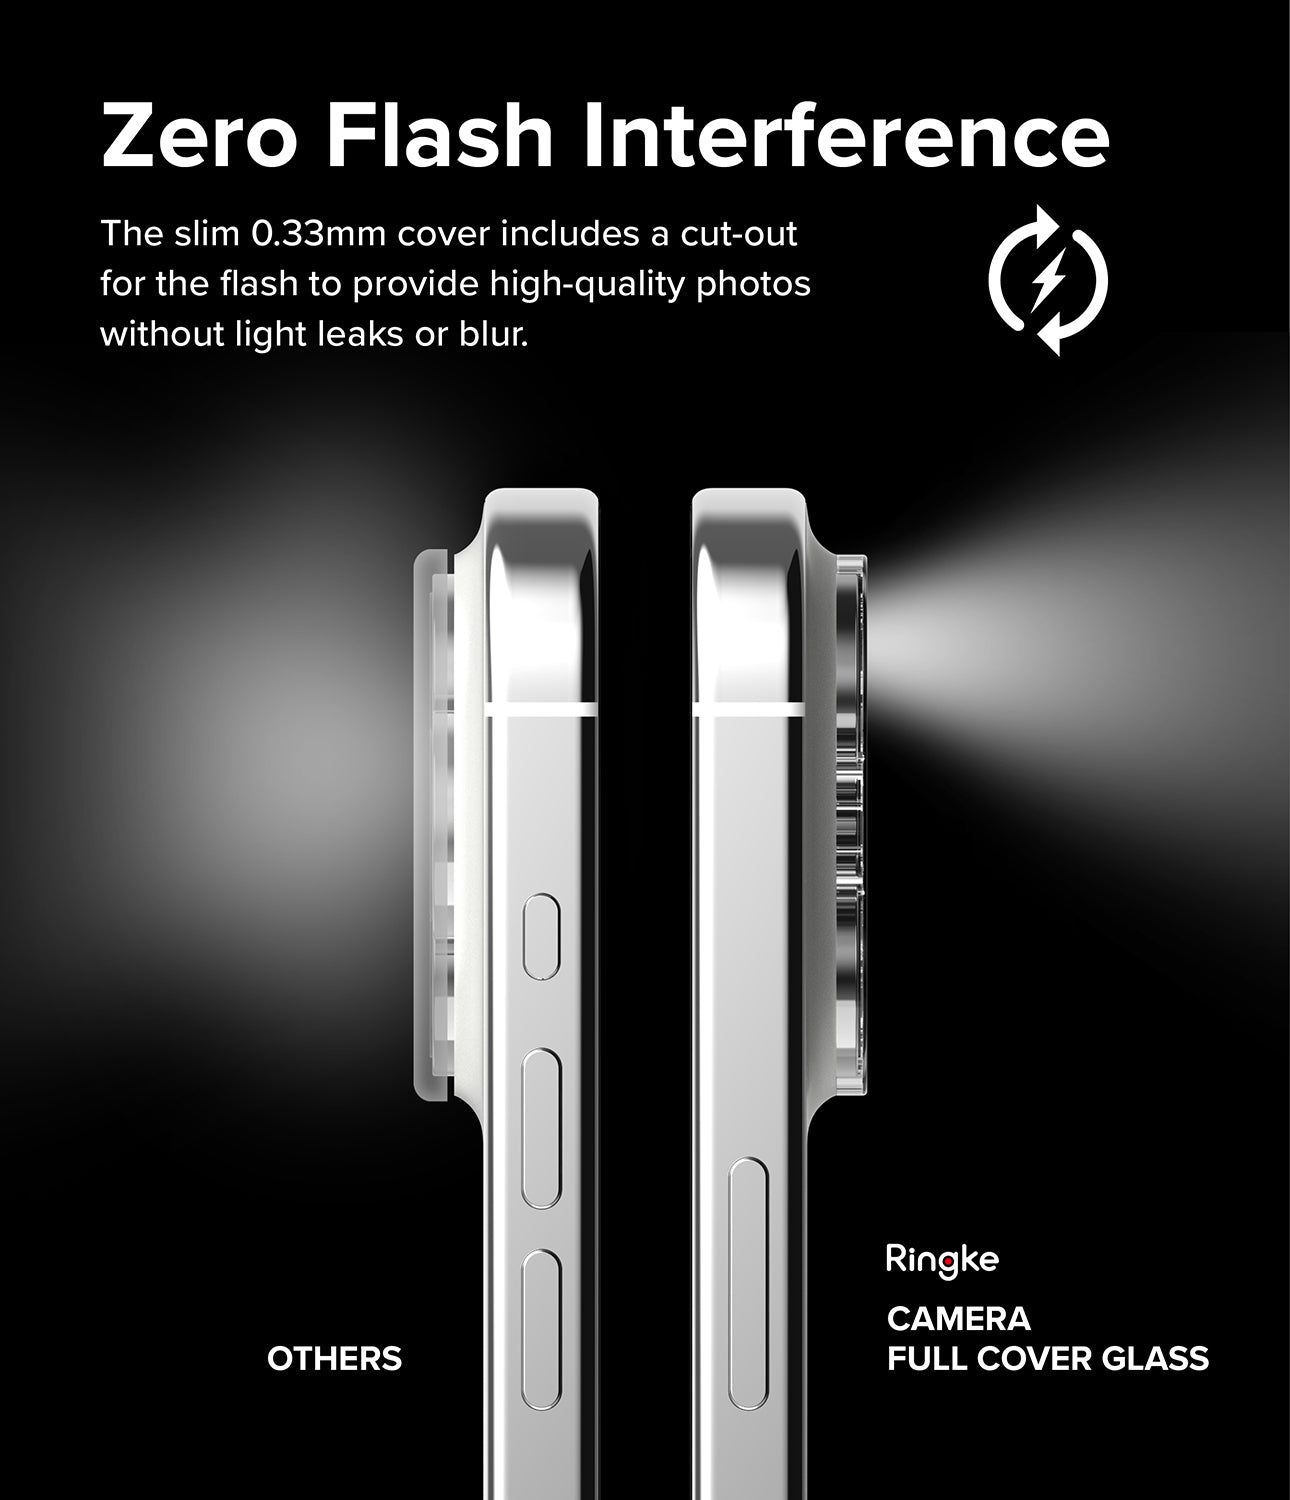 iPhone 15 Pro Max | Camera Protector Glass [2 Pack]- Zero Flash Interference. The slim 0.33mm cover includes a cut-out for the flash to provide high-quality photos without light leaks or blur.